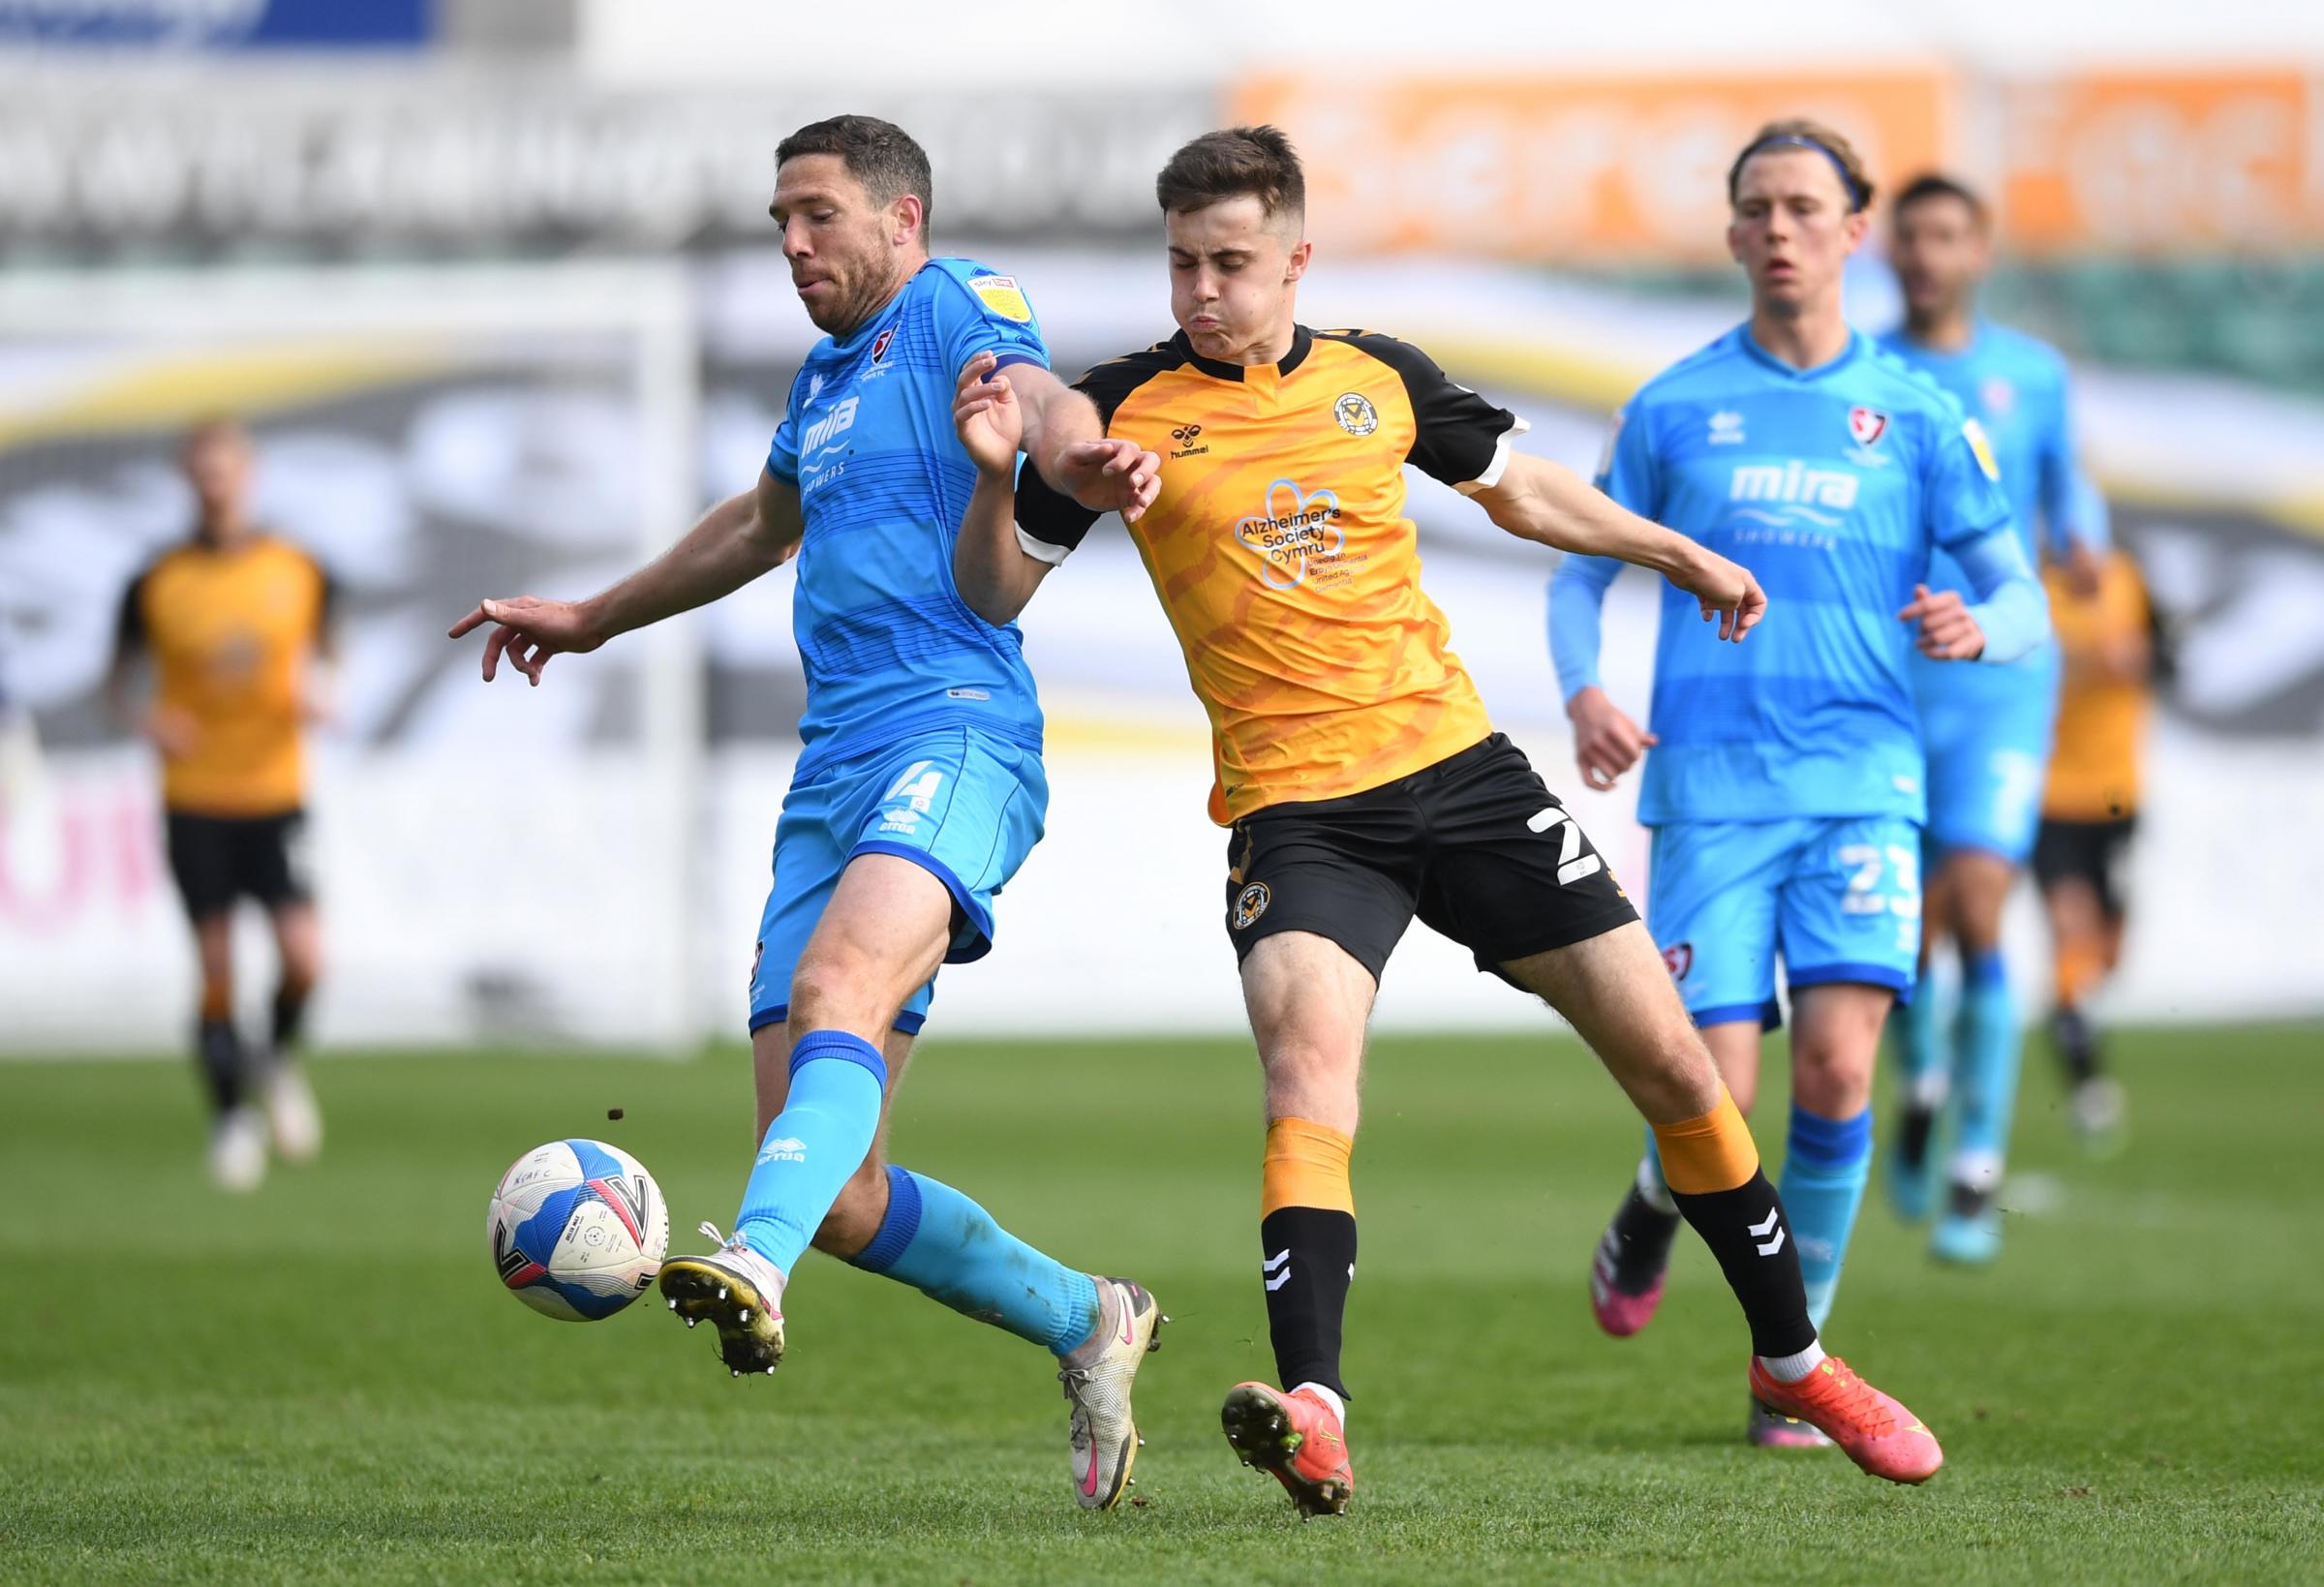 01.05.21 - Newport County v Cheltenham Town - SkyBet League 2 -.Ben Tozer of Cheltenham Town is tackled by Lewis Collins of Newport County..